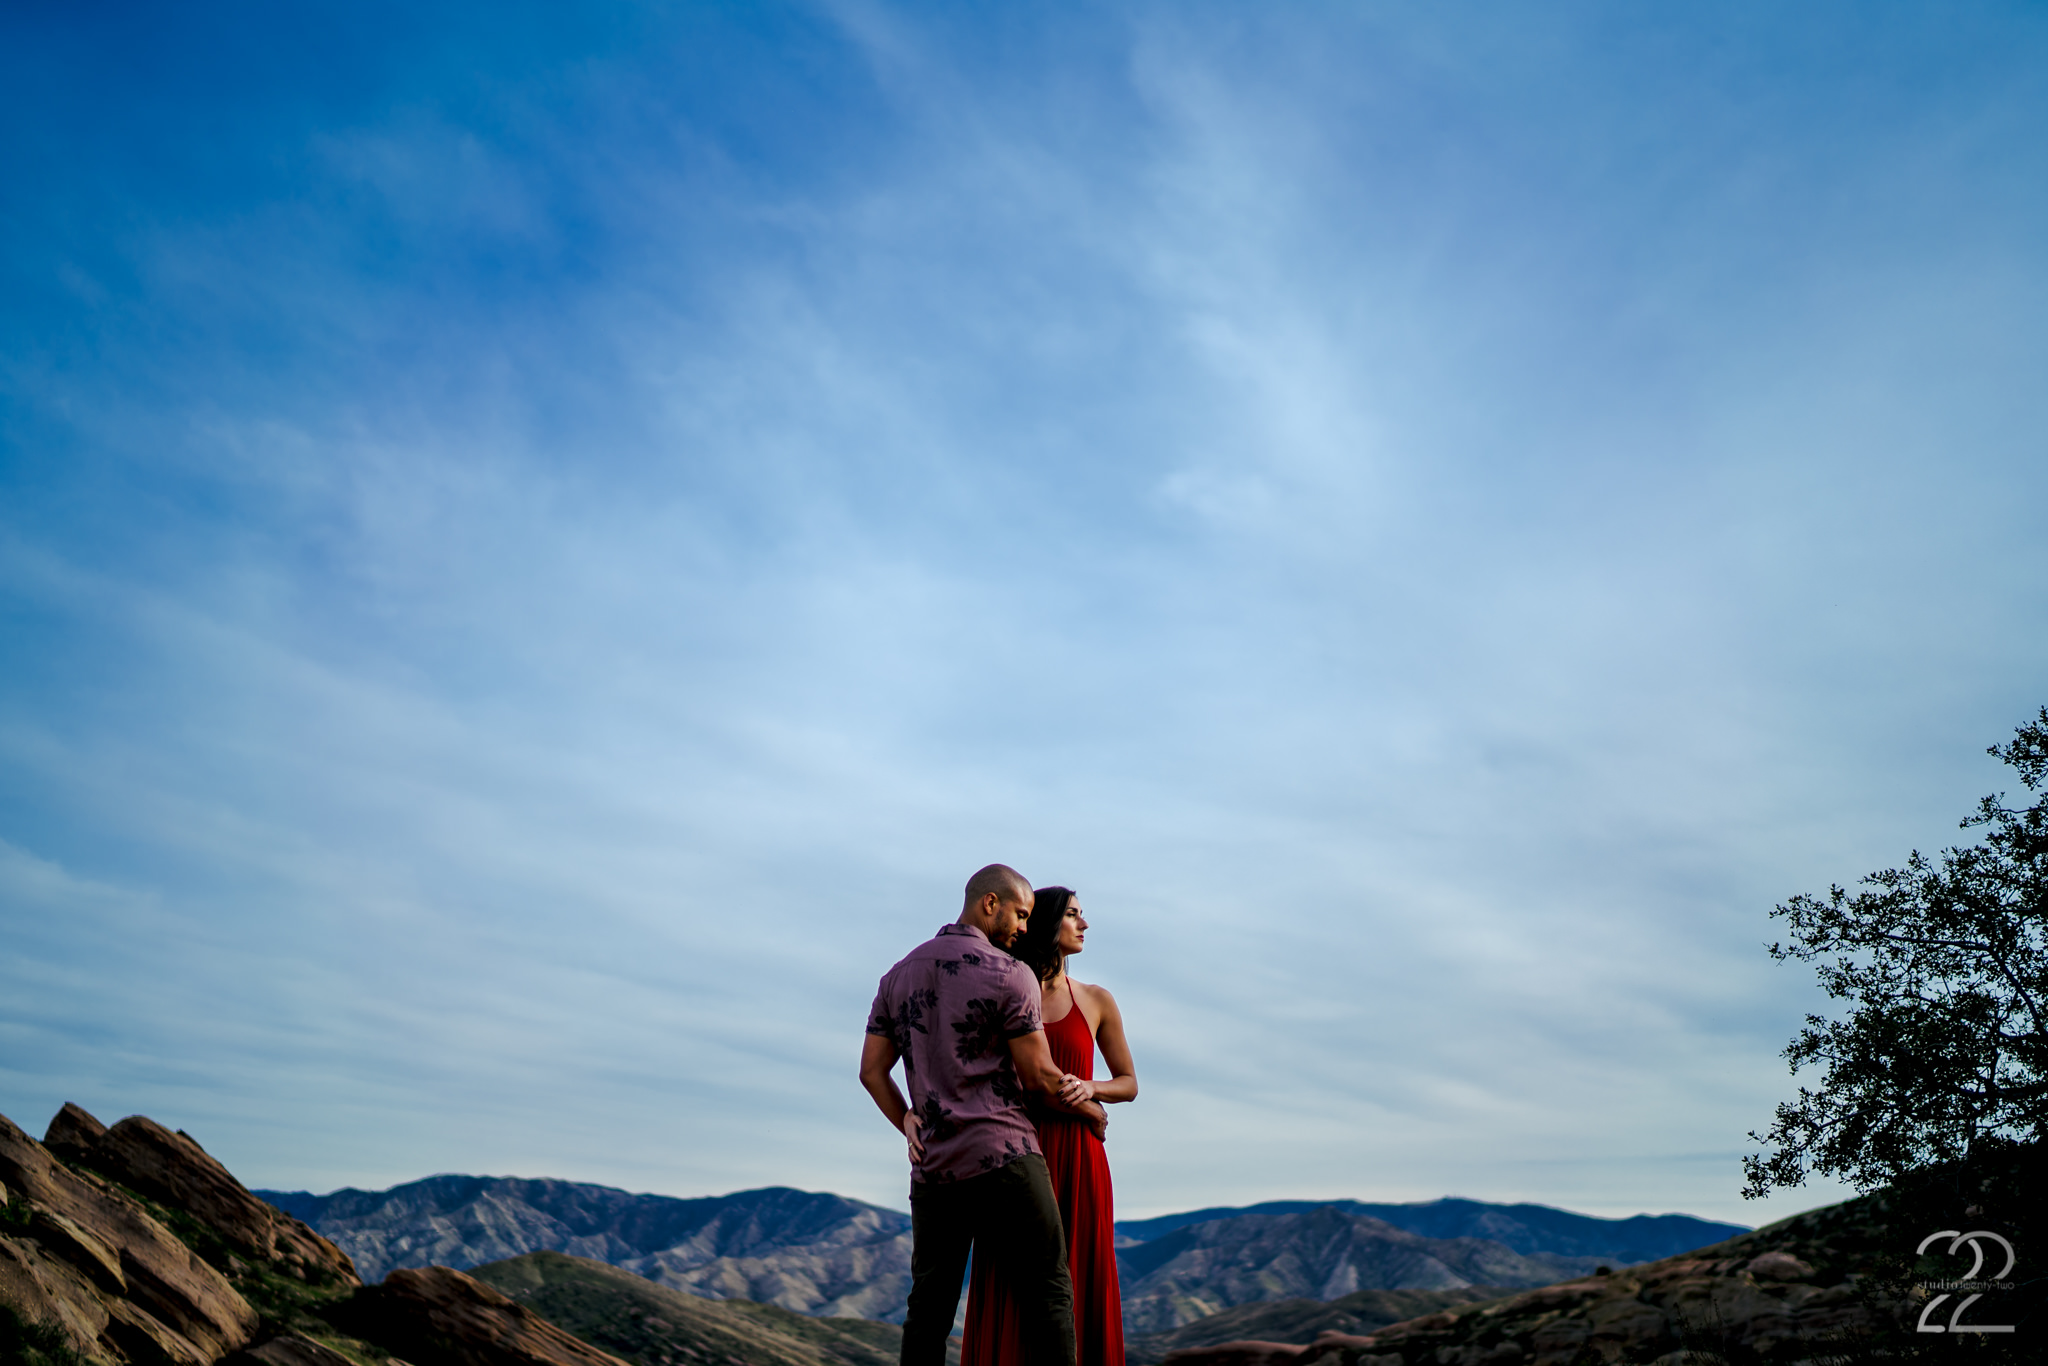  With such beauty as the Vasquez Rocks as a backdrop for a couples, wedding, or engagement session, you cannot go wrong! High on top of a rocky mountain, Michael embraces Natalie as they look toward the sunset. Intimate environmental portraits are always some of my favorites, as it feels like you see the couple being one with nature. The West Coast is always one of my favorite places to be a wedding and engagement photographer, and this time at the Vasquez Rocks did not disappoint!  Sony A7Riii | Sony 35mm f/1.4 @ f/1.4 | ISO 50 |  1/2500 sec | DVLOP presets: Jide Assumpção